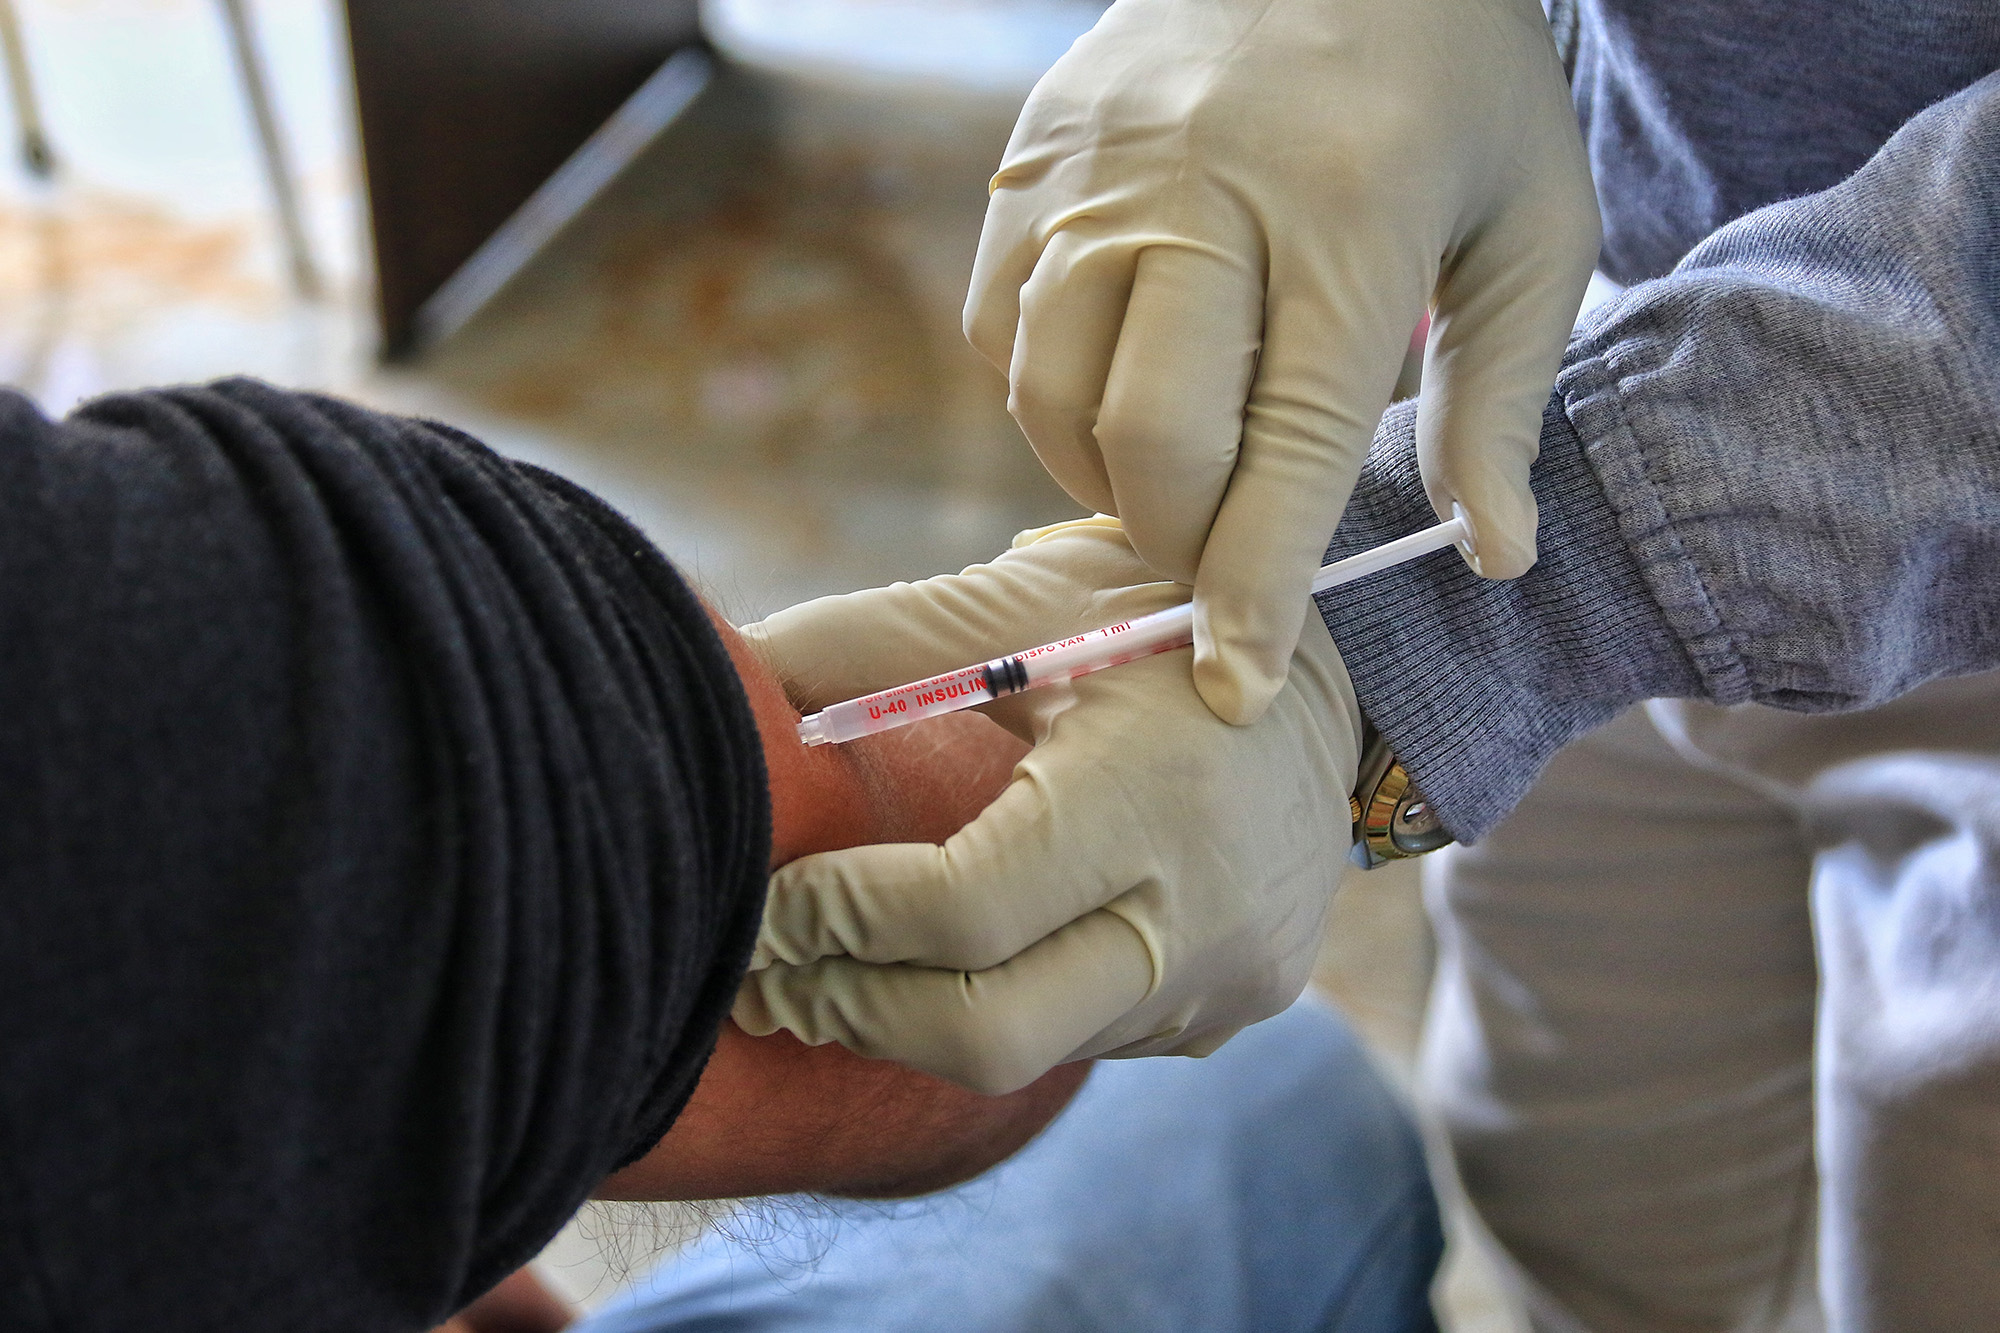 A volunteer is vaccinated with Bharat Biotech's Covaxin during a human trial at the Maharaja Agrasen Super Speciality Hospital in Jaipur, Rajasthan, India, on December 18, 2020. 